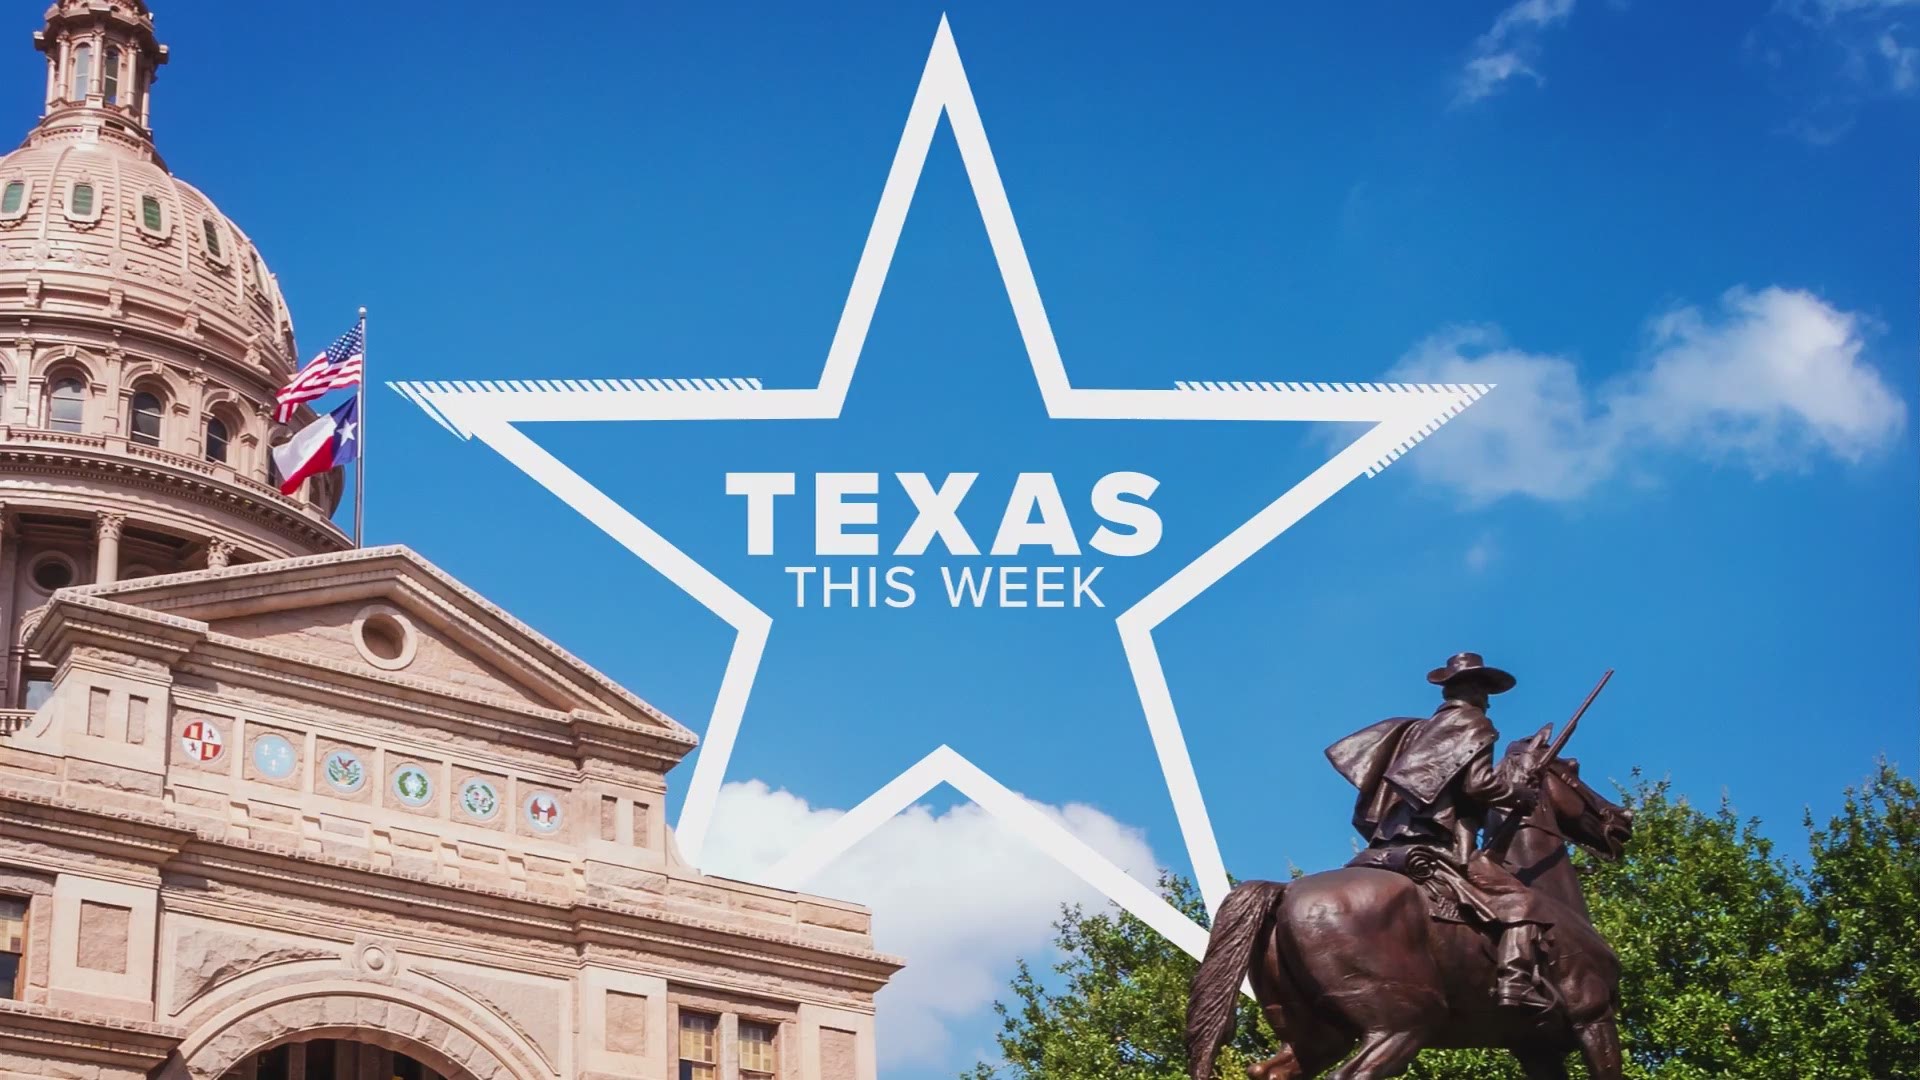 In Texas This Week Ashley Goudeau discusses the new Texas laws that come into effect on Sunday.